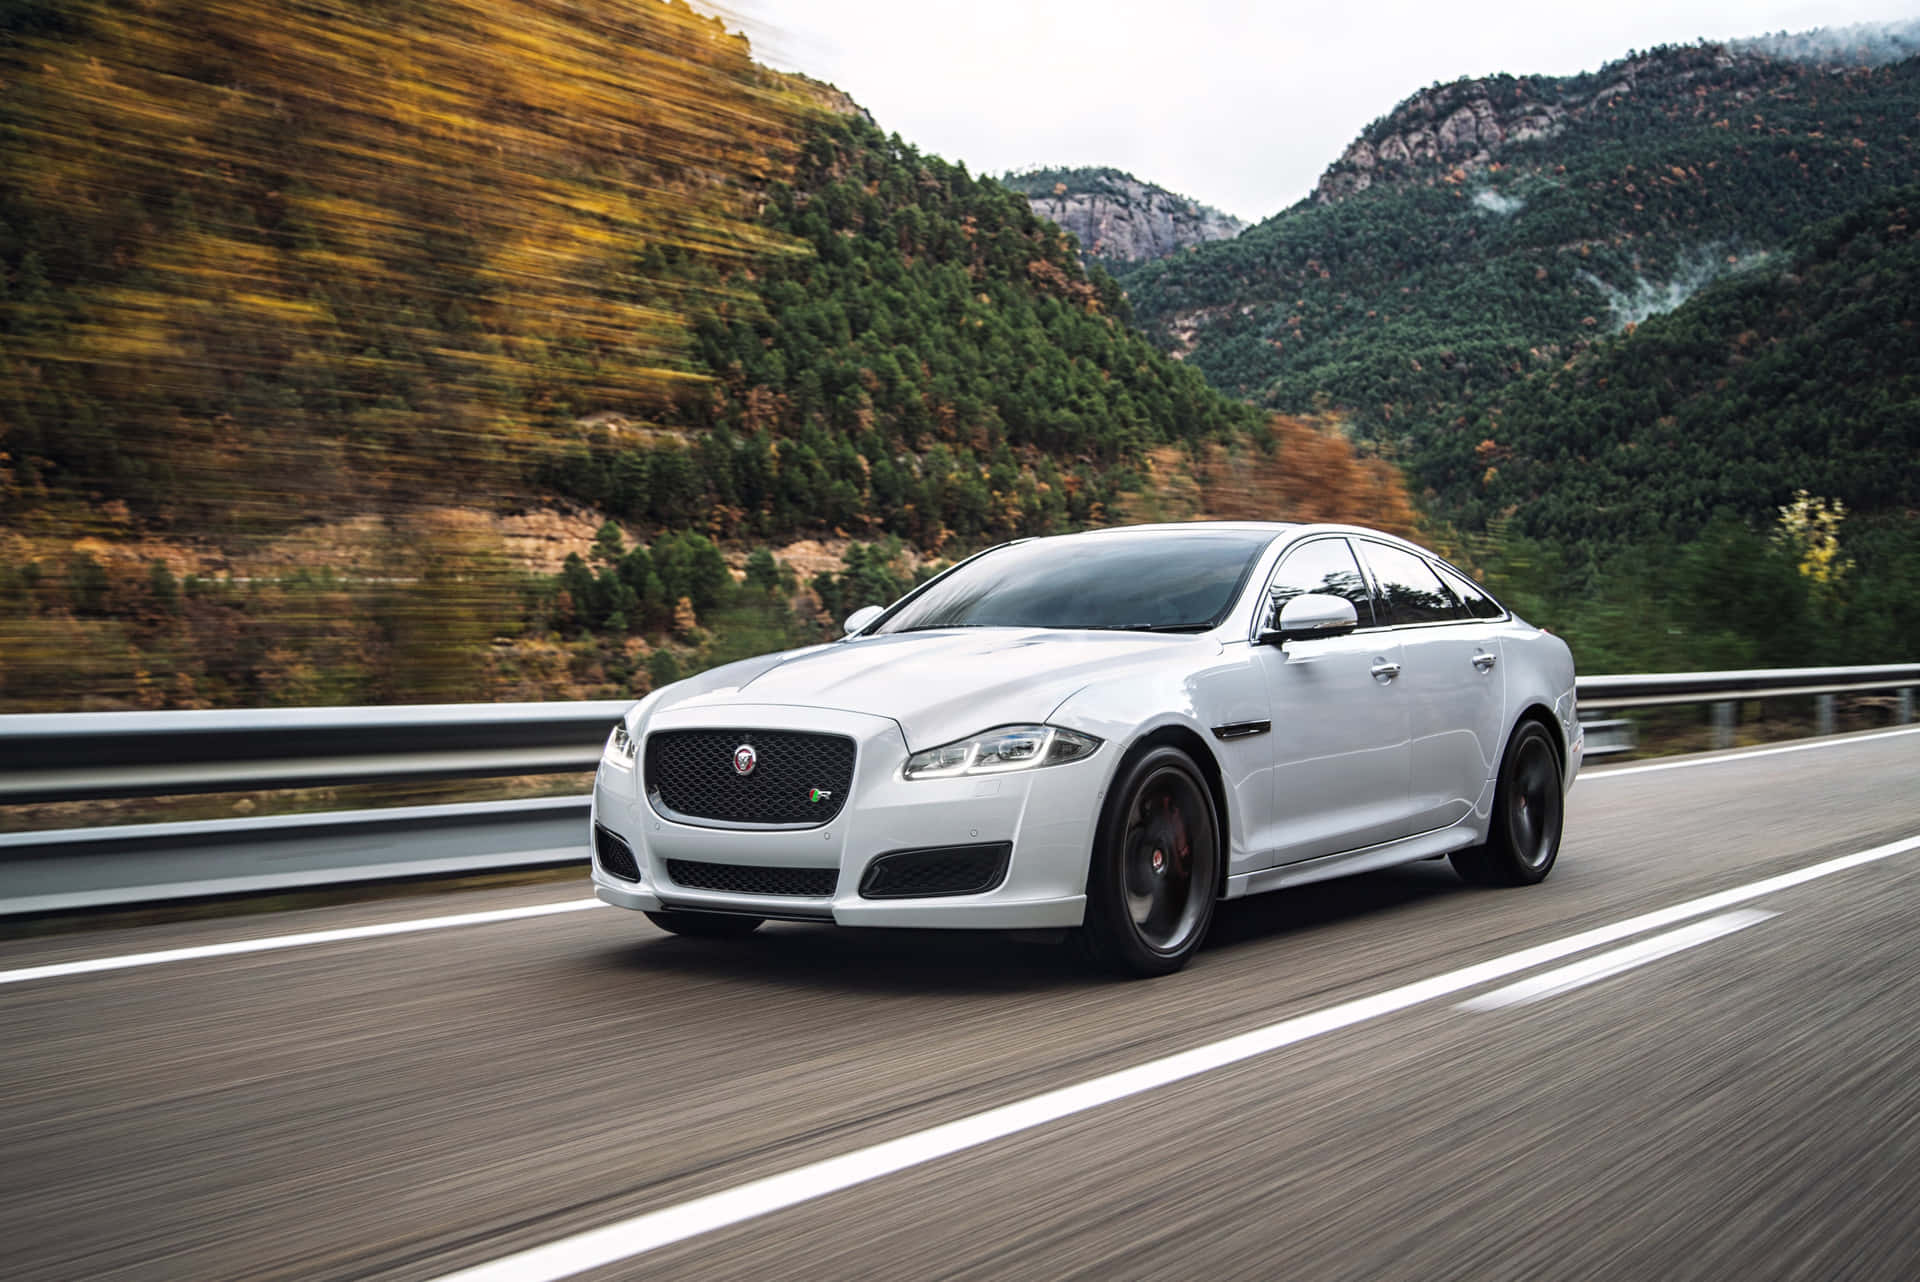 Exquisite And Powerful Jaguar Xj In Action Wallpaper